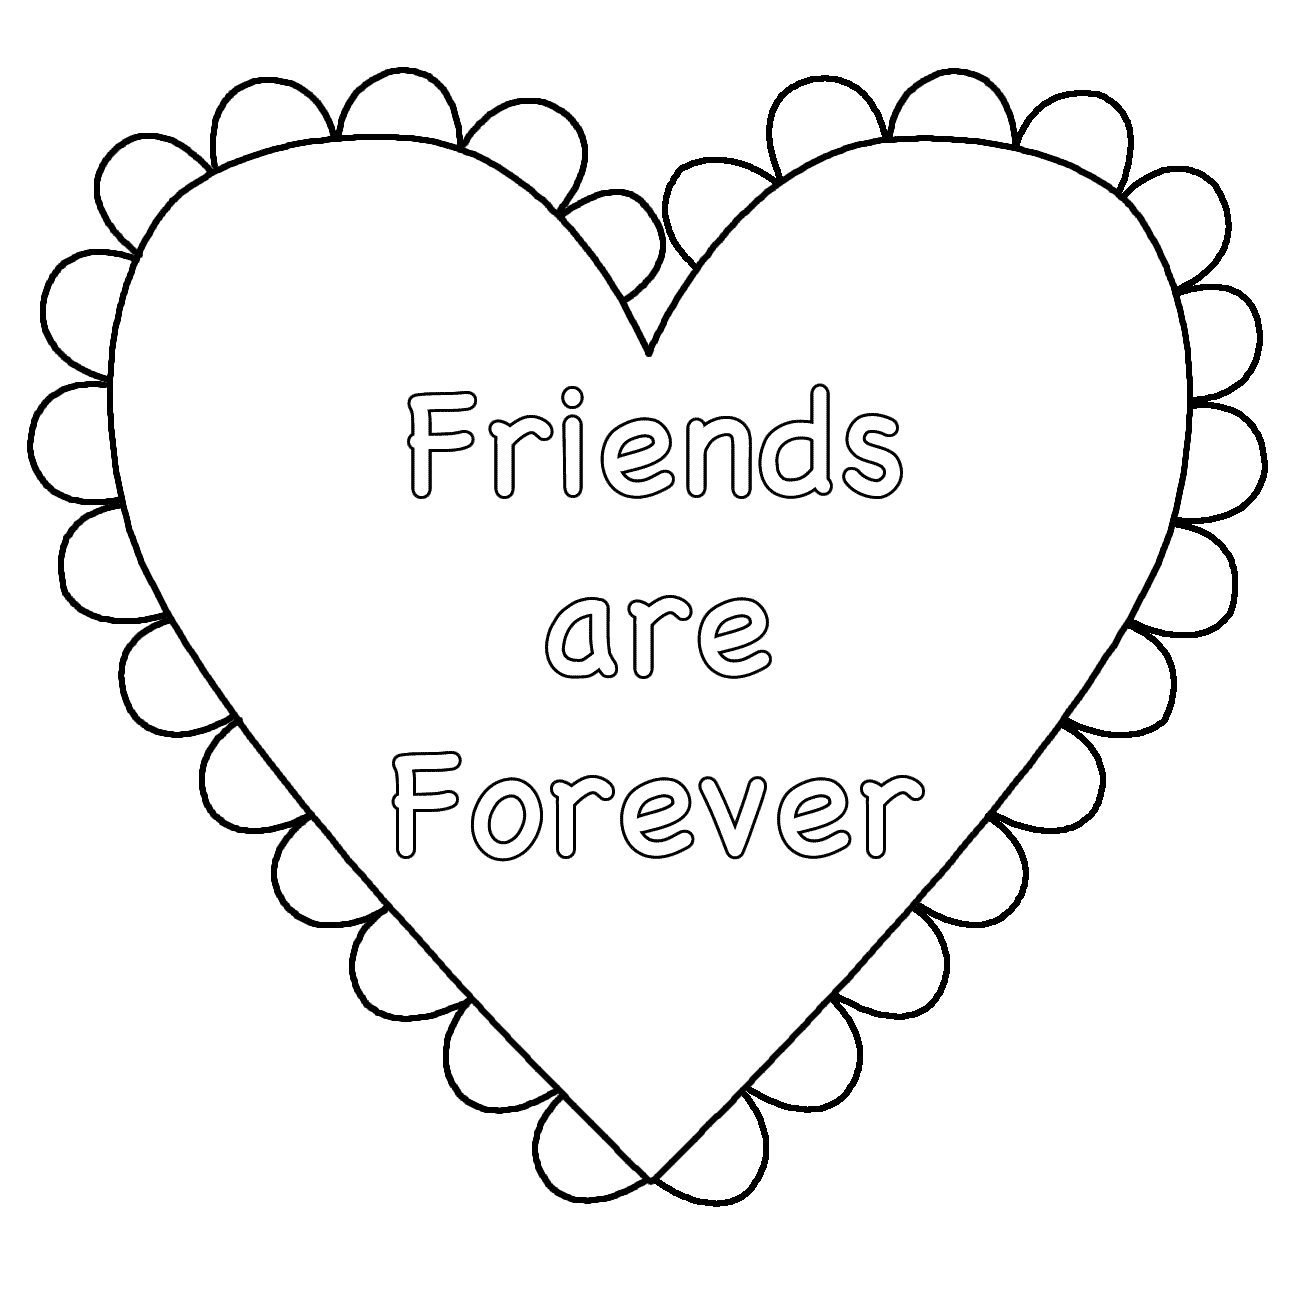 Heart (Friends are Forever) - Coloring Page (Valentine's Day)